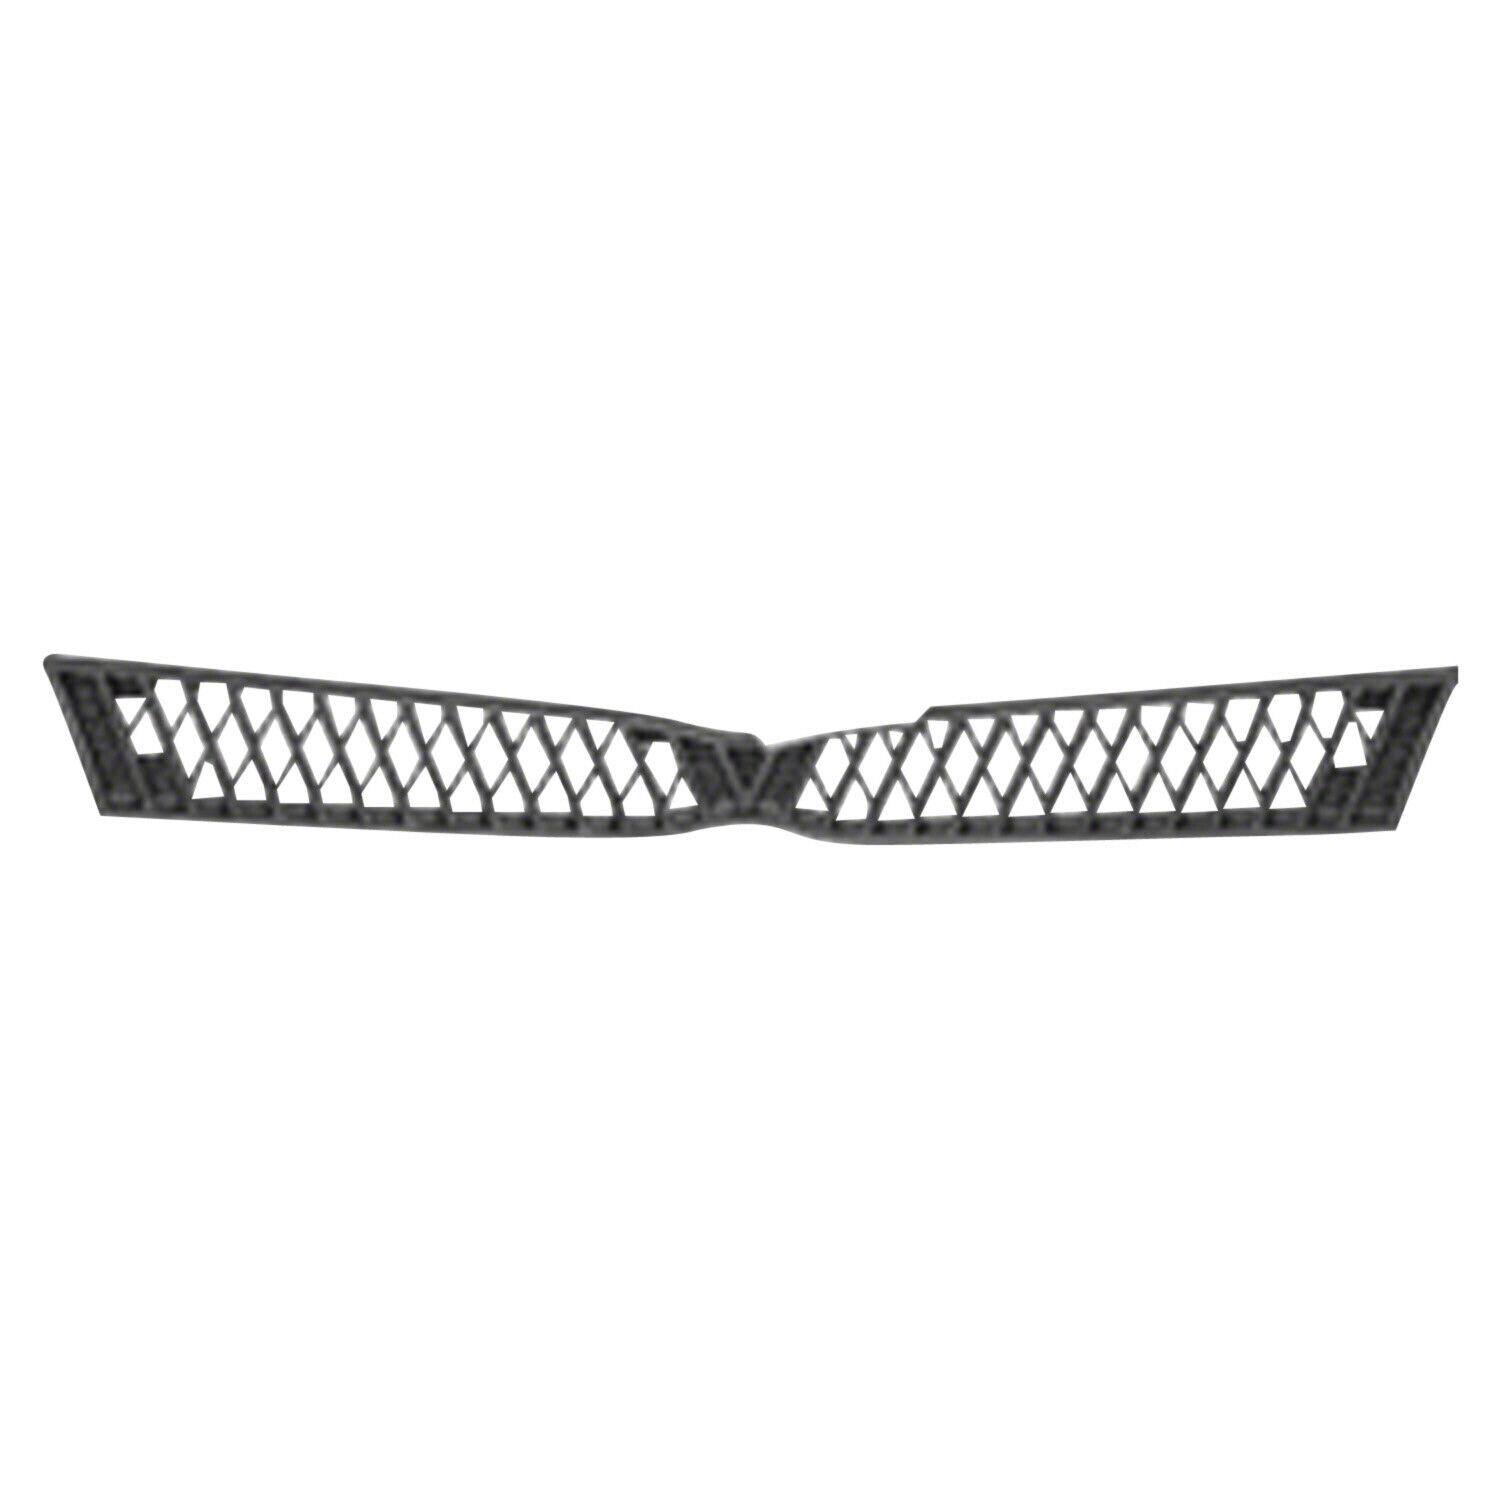 TO1200230 New Grille Fits 2000-2002 Toyota ECHO